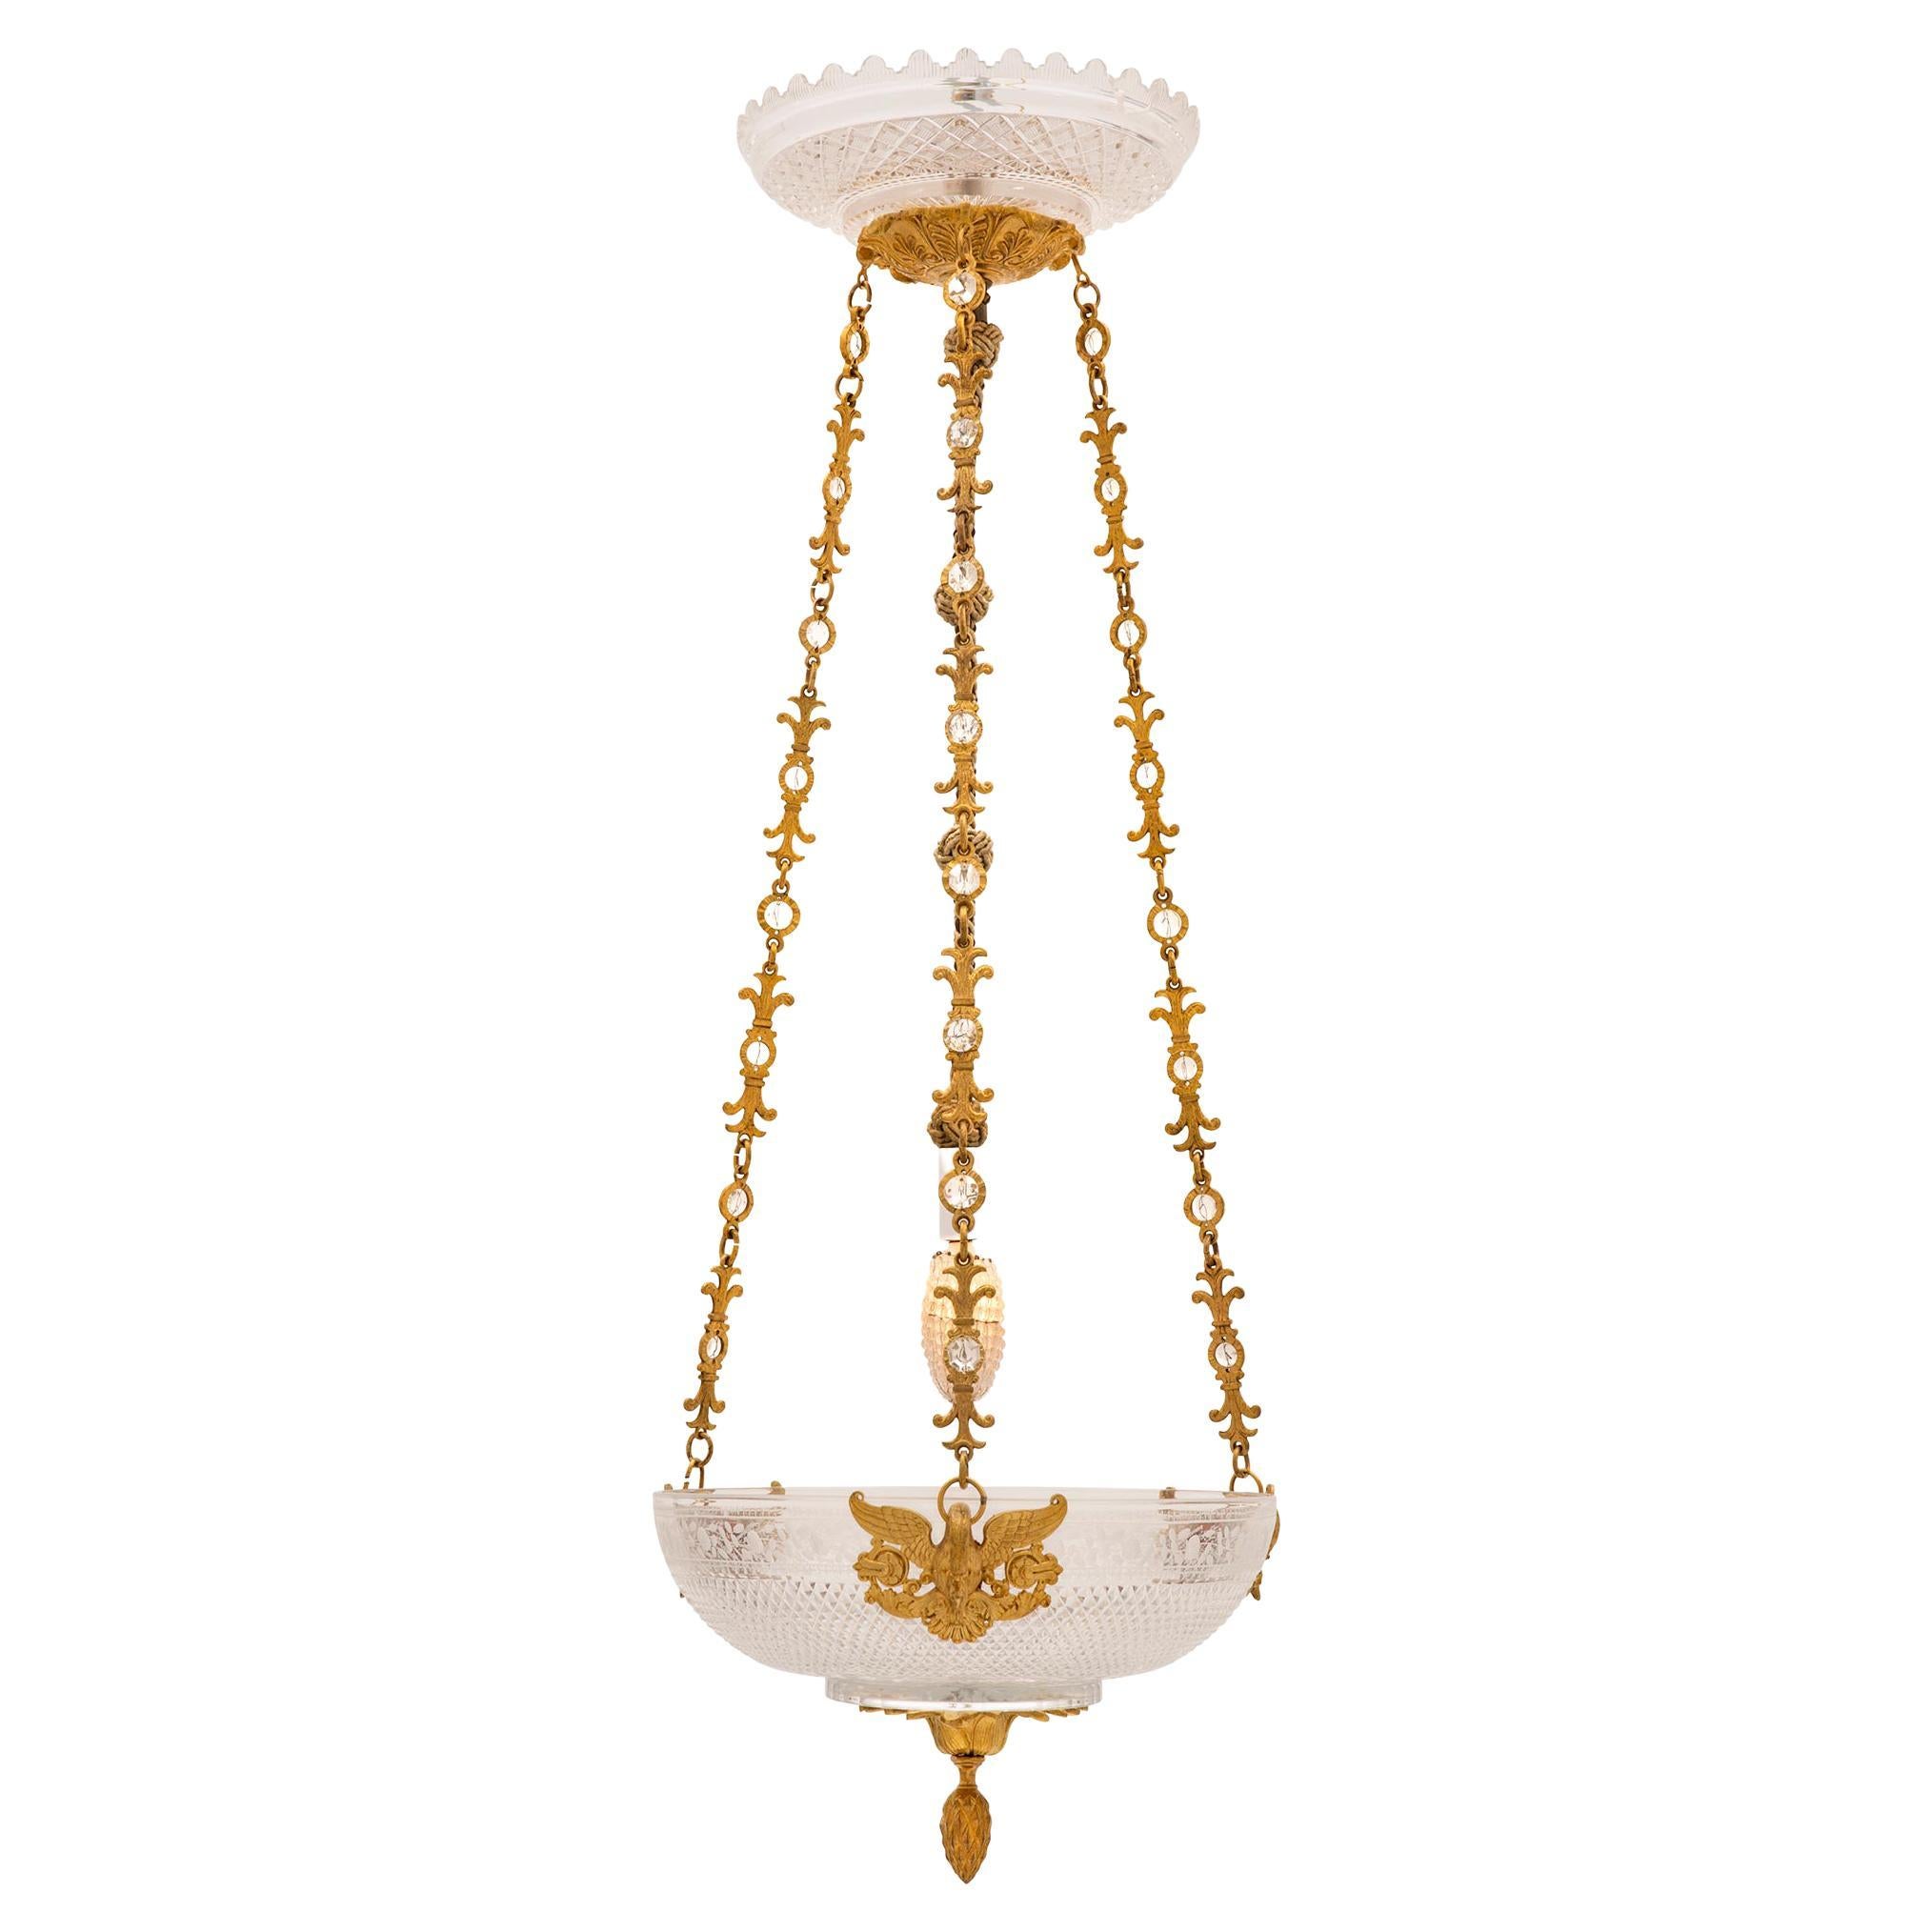 French Early 19th Century 1st Empire Period Baccarat Crystal & Ormolu Chandelier For Sale